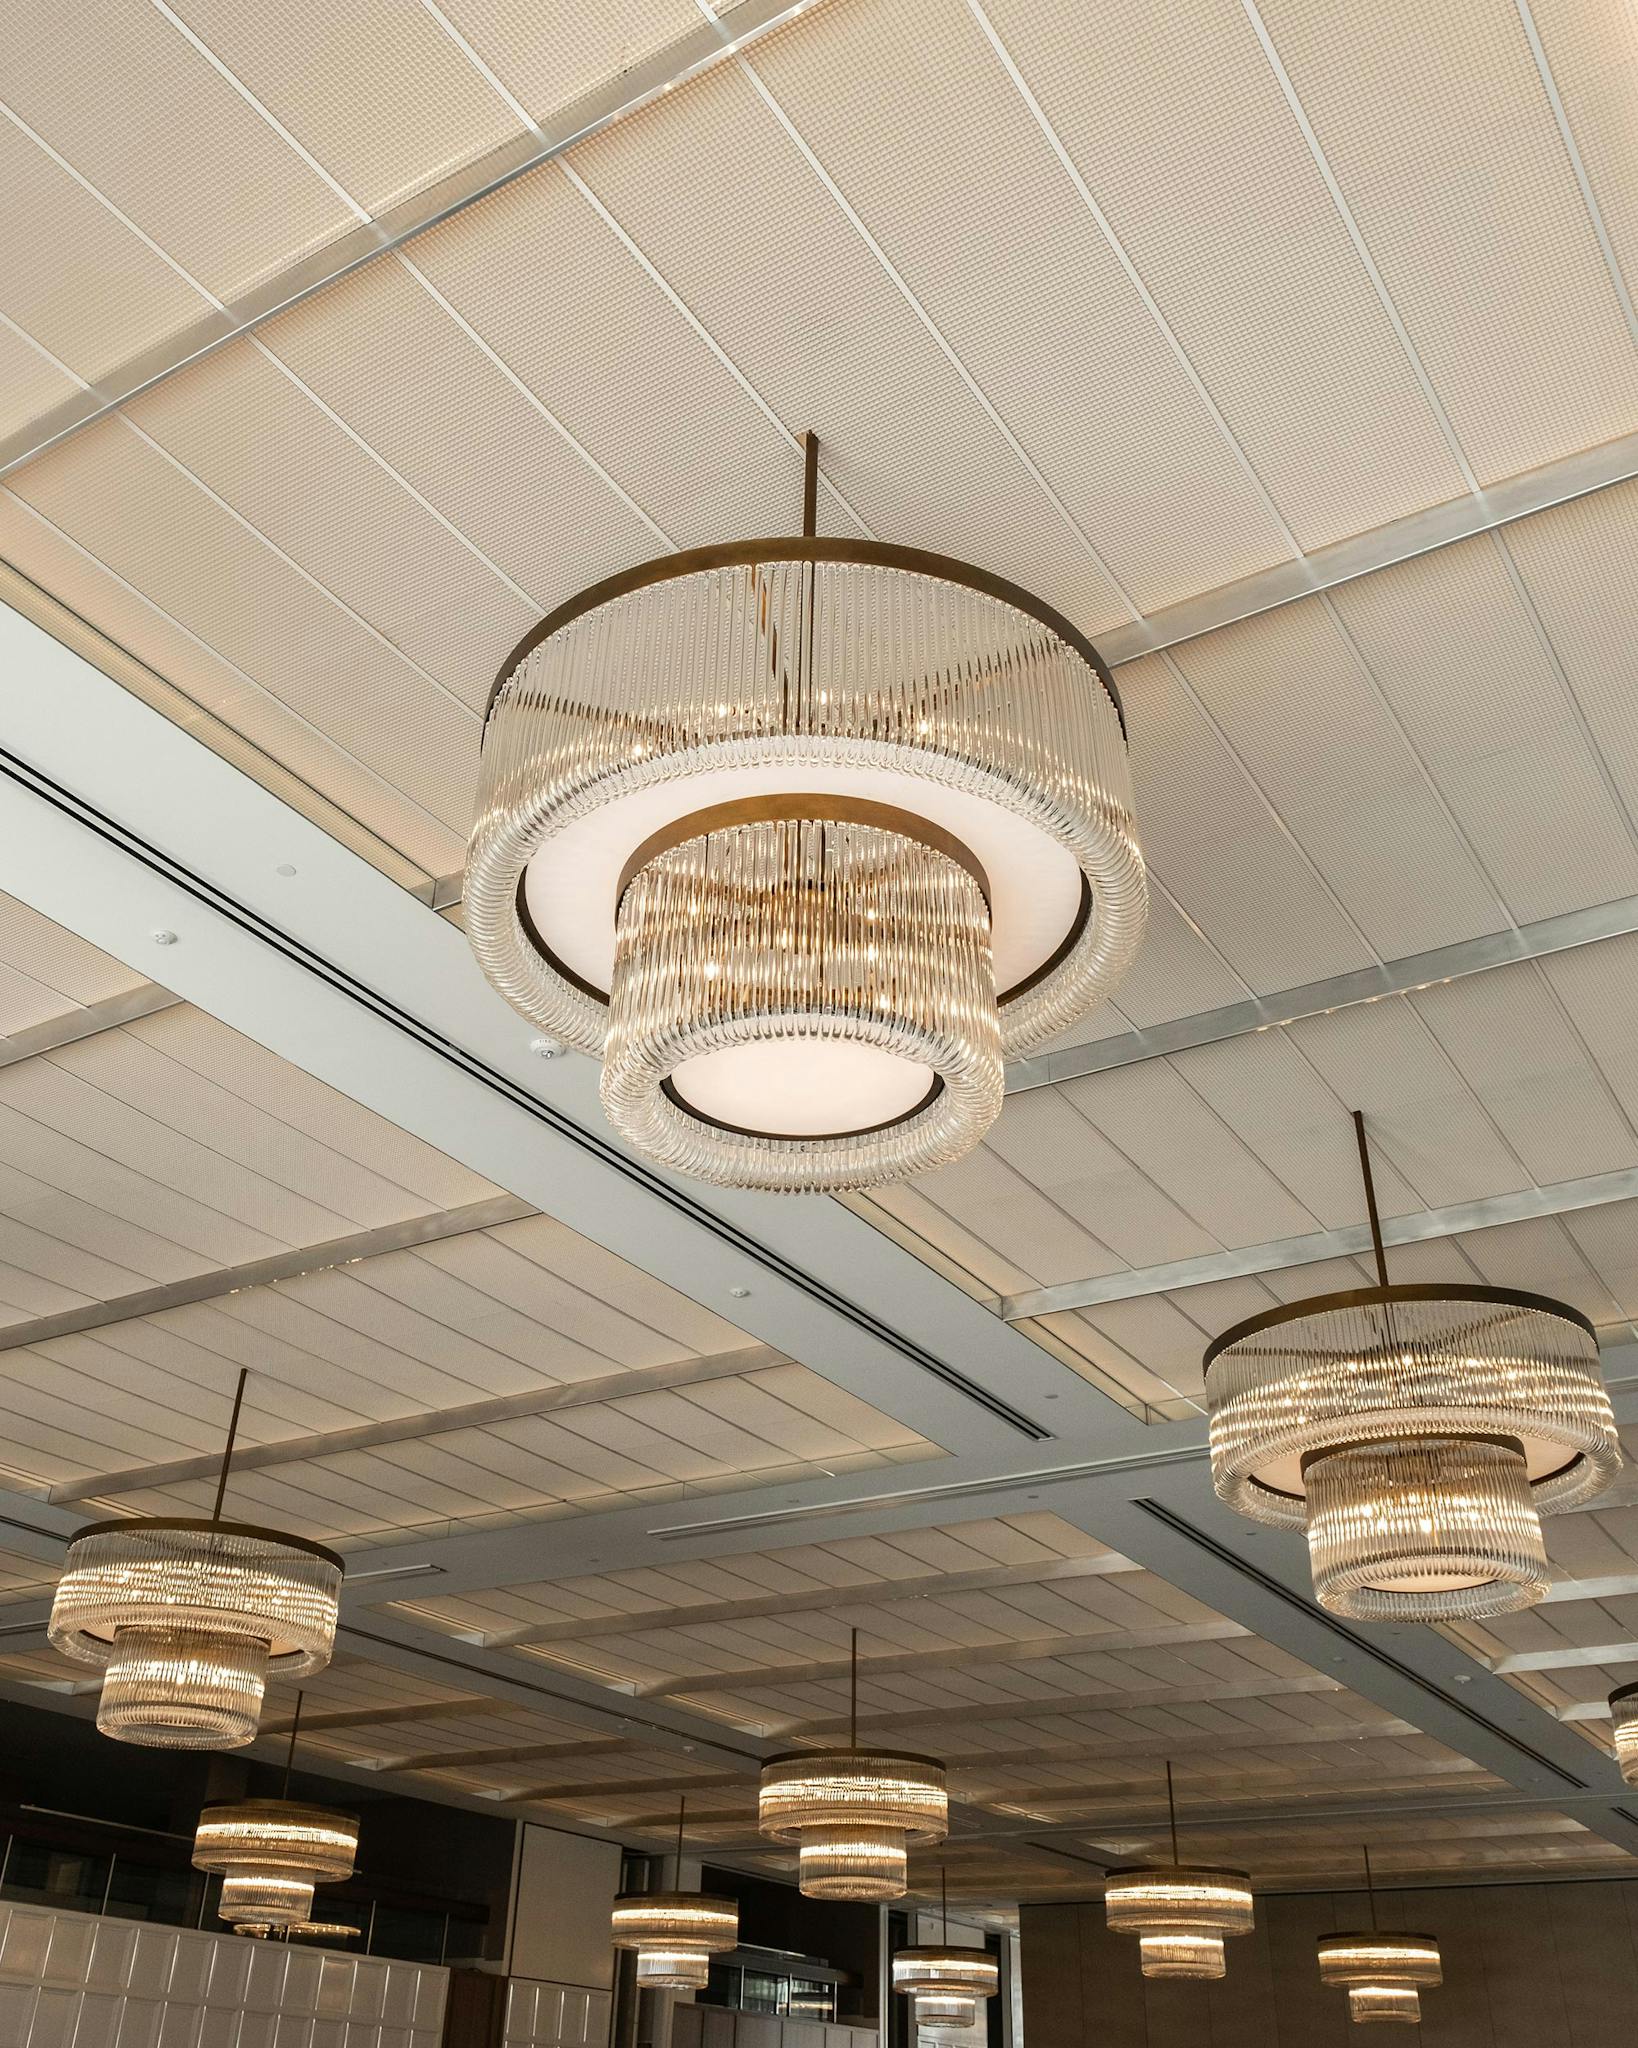 The ceiling of the Thompson Hotel with modern light fixtures.